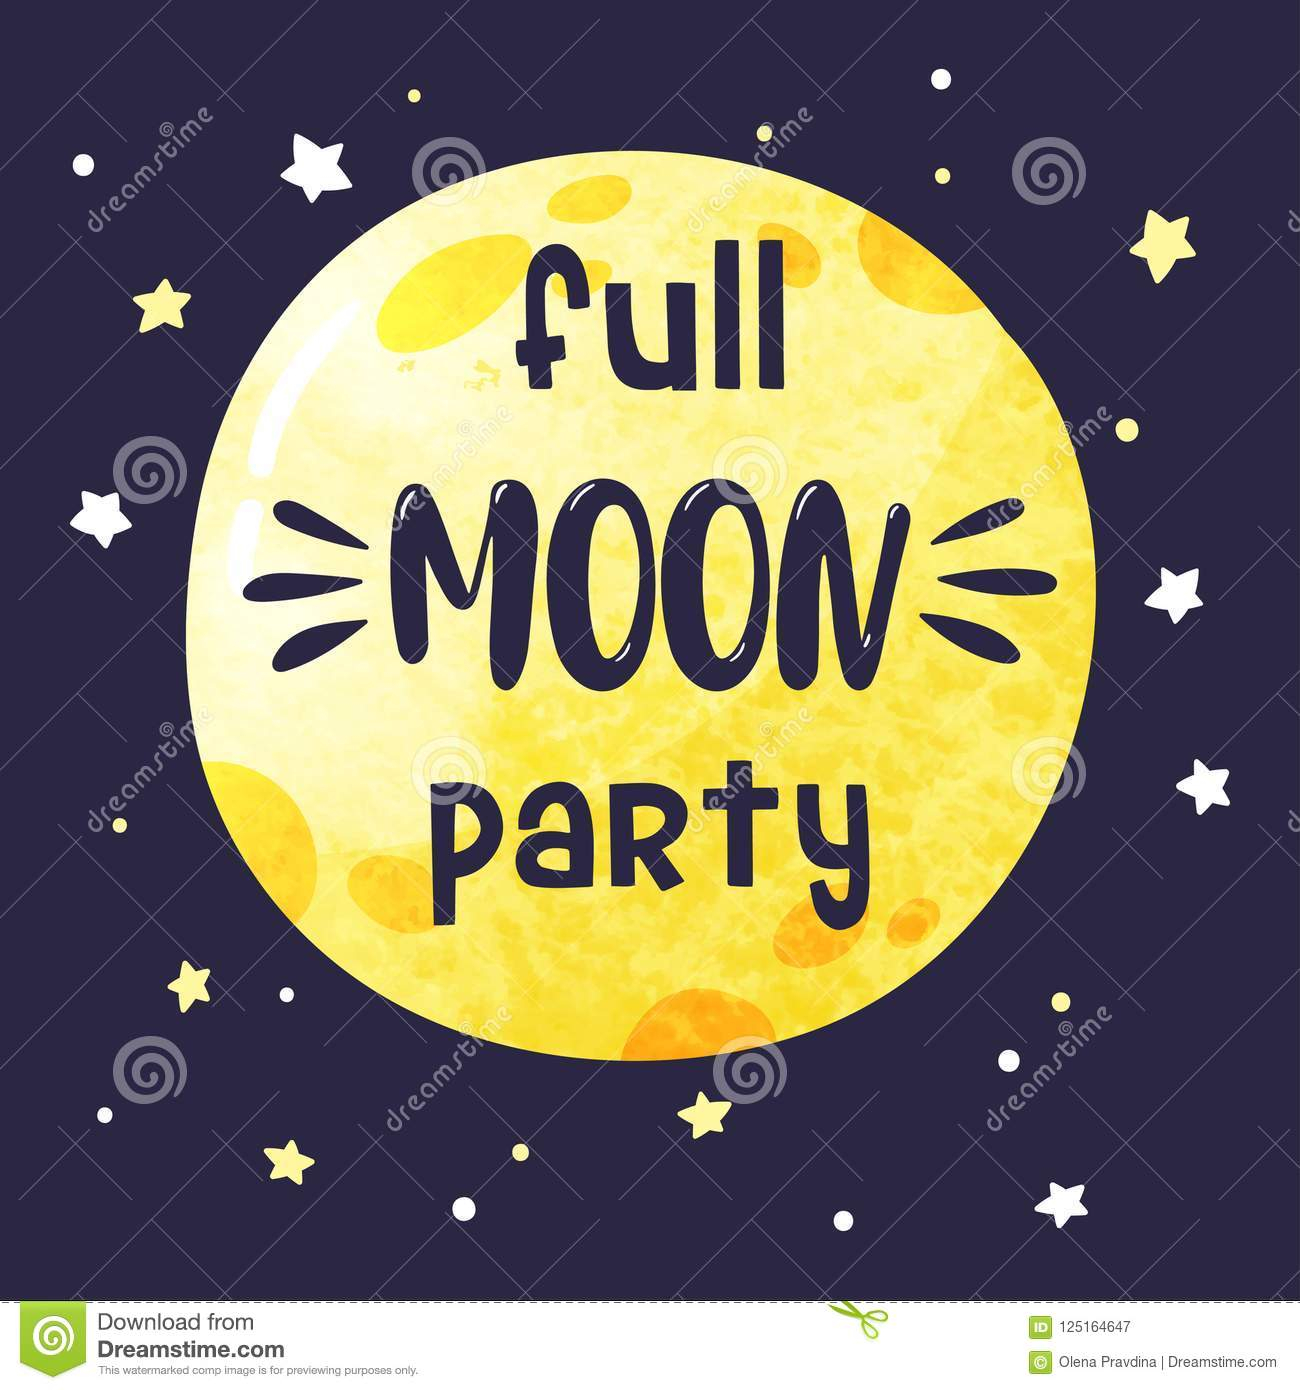 Card With Big Full Moon And Handwritten Inscription Full Moon Party within dimensions 1300 X 1390